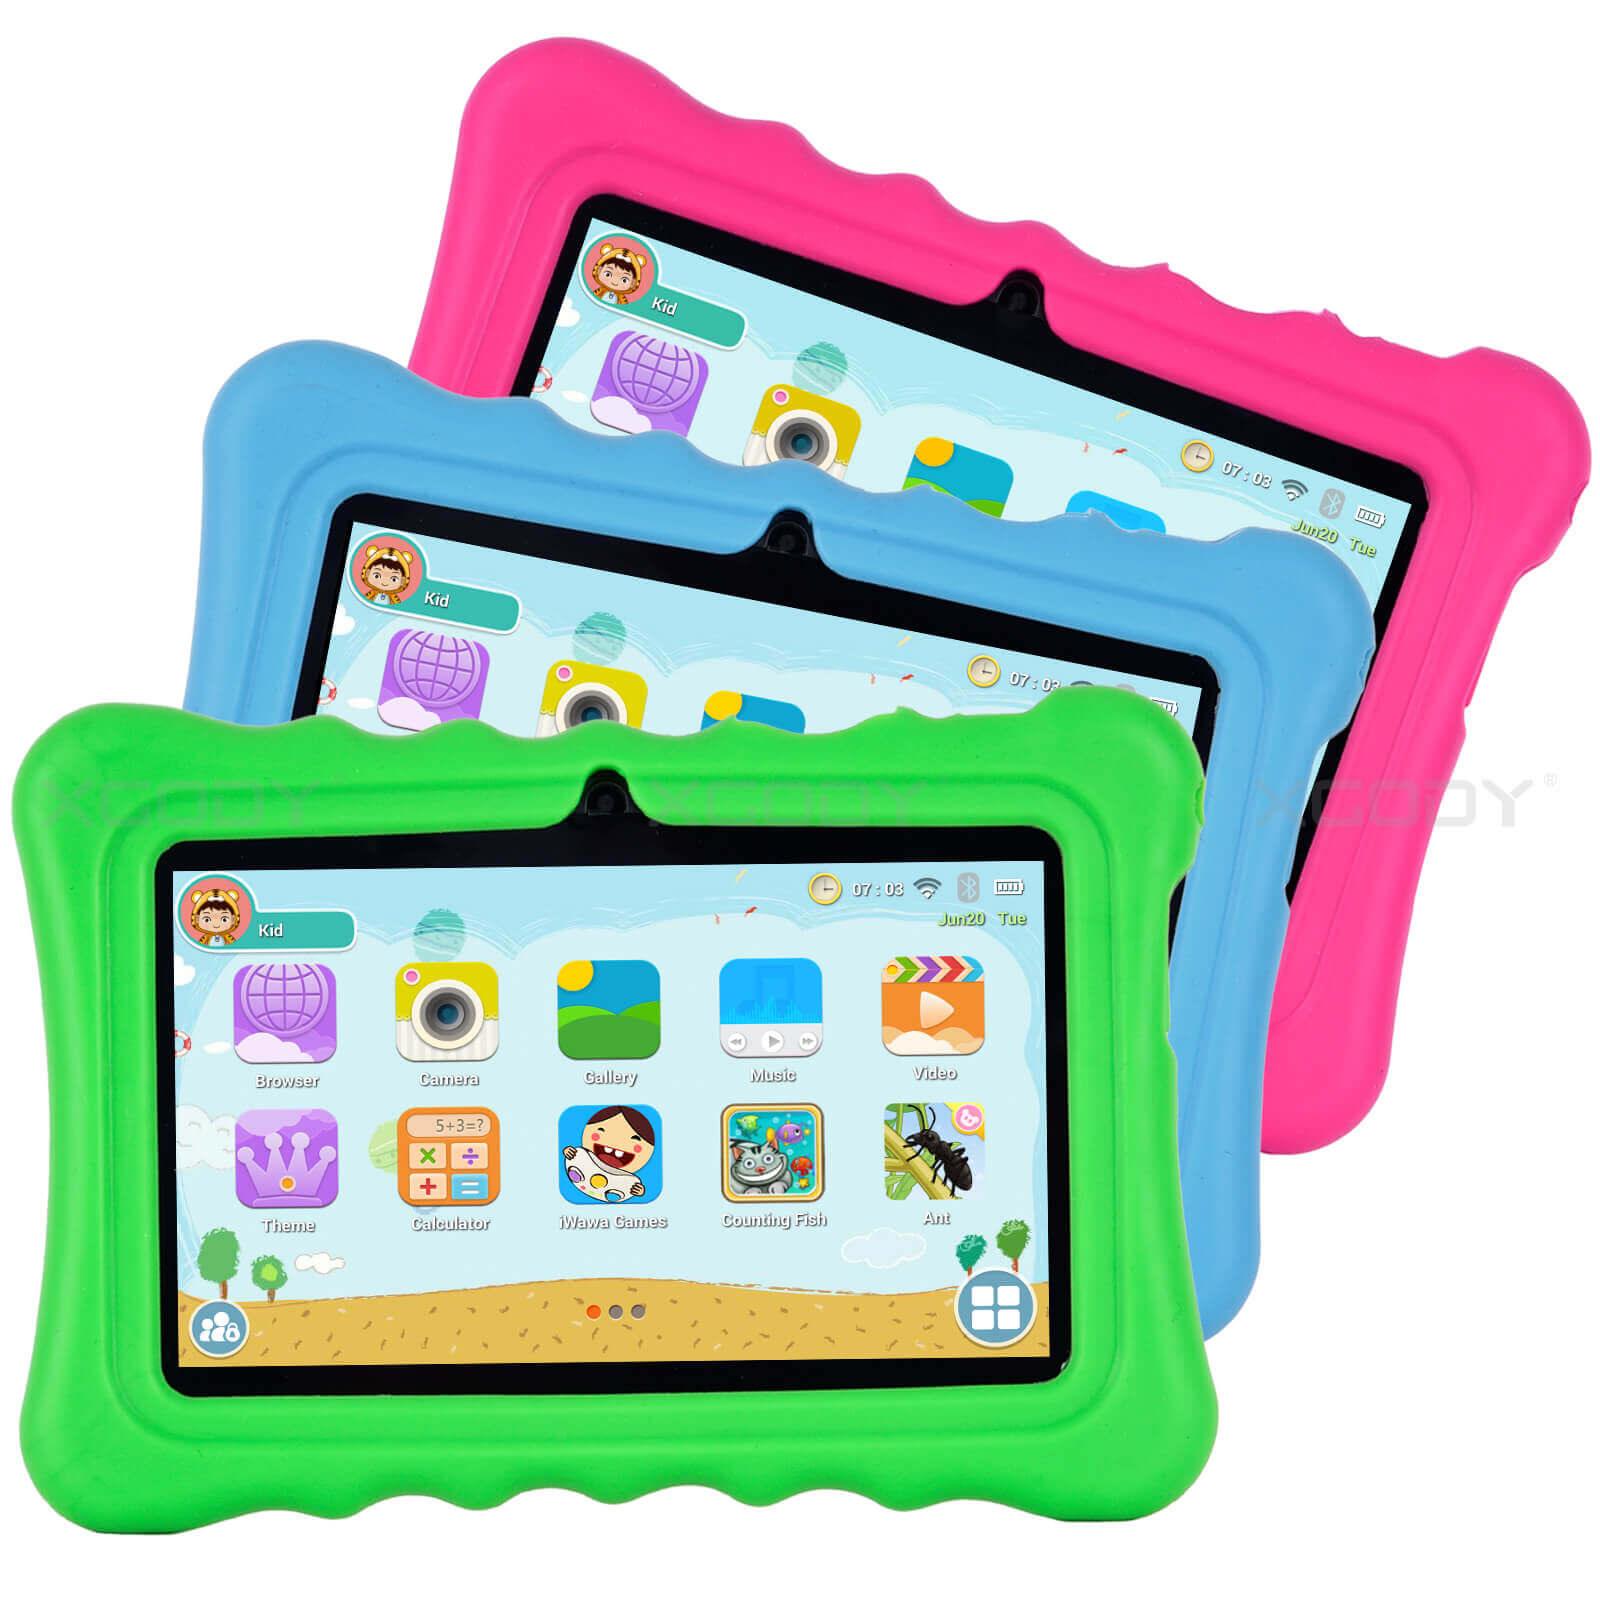 Cost-effective and Most worthwhile XGODY T702 Pro Android 11 HD 32G Kids Tablet, With Protective Case, Download Google The Apps For Free - XGODY 